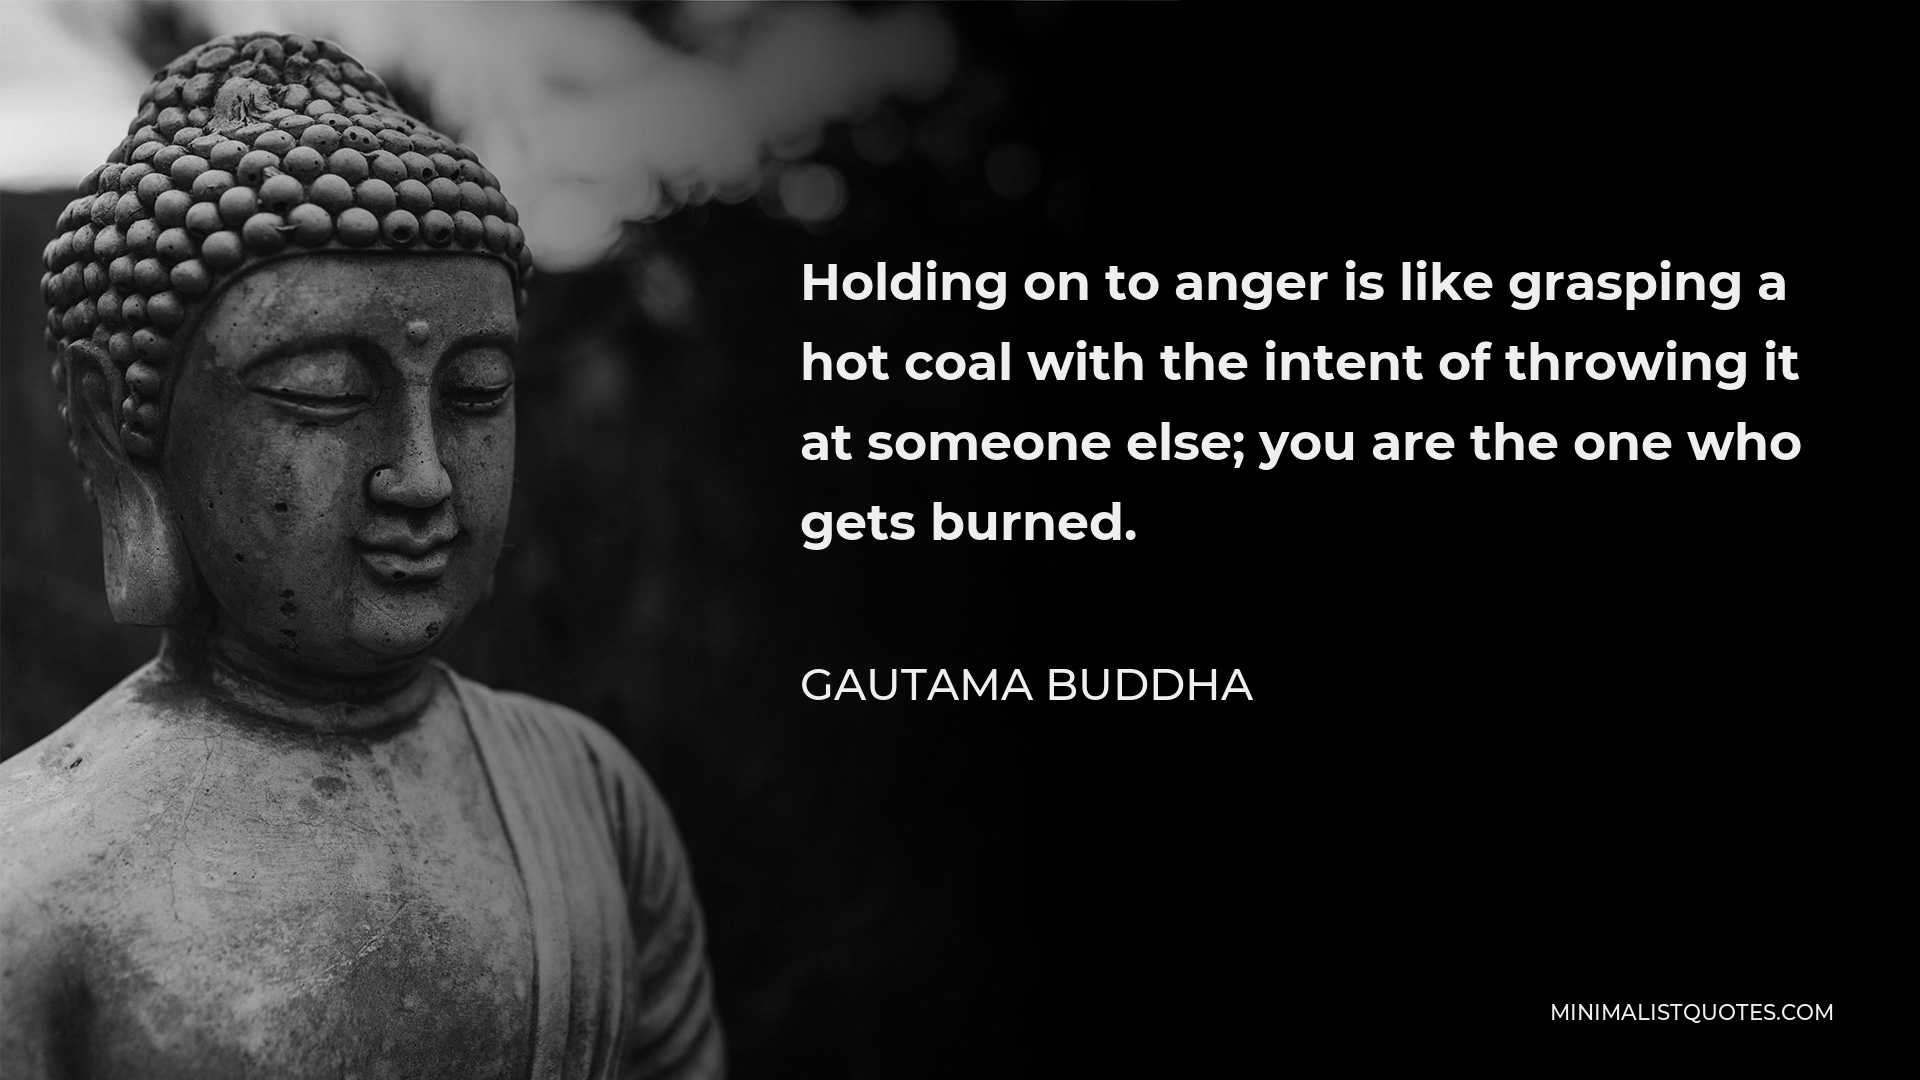 Gautama Buddha Quote - Holding on to anger is like grasping a hot coal with the intent of throwing it at someone else; you are the one who gets burned.